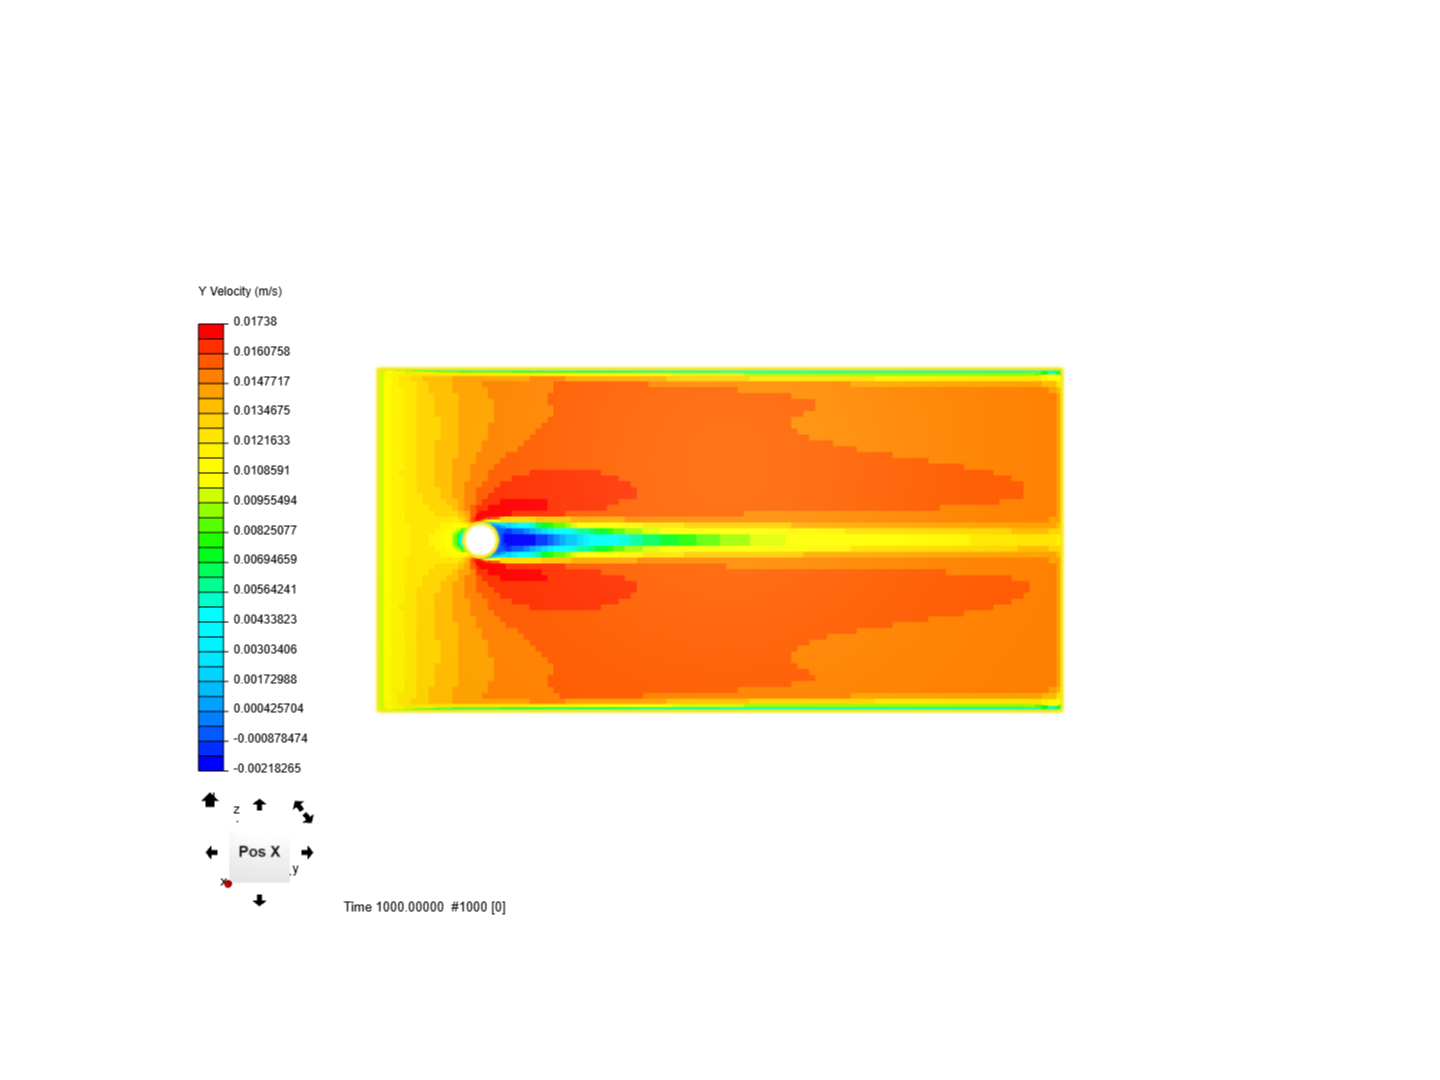 CFD 3 - Flow past Cylinder image